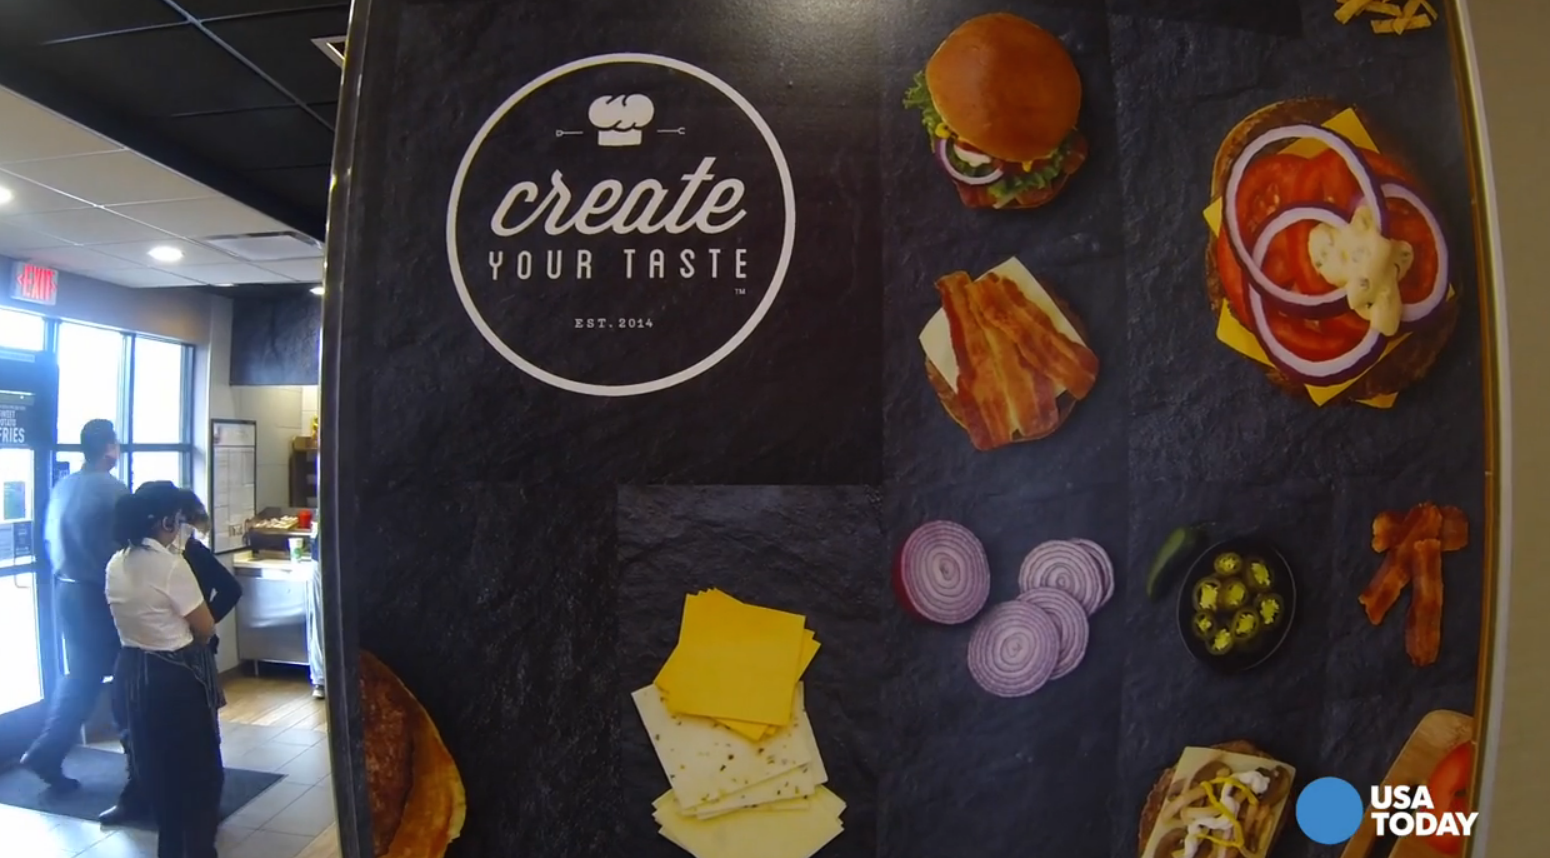 McDonald’s Bringing Build-Your-Own Burger Option To 2,000 Locations